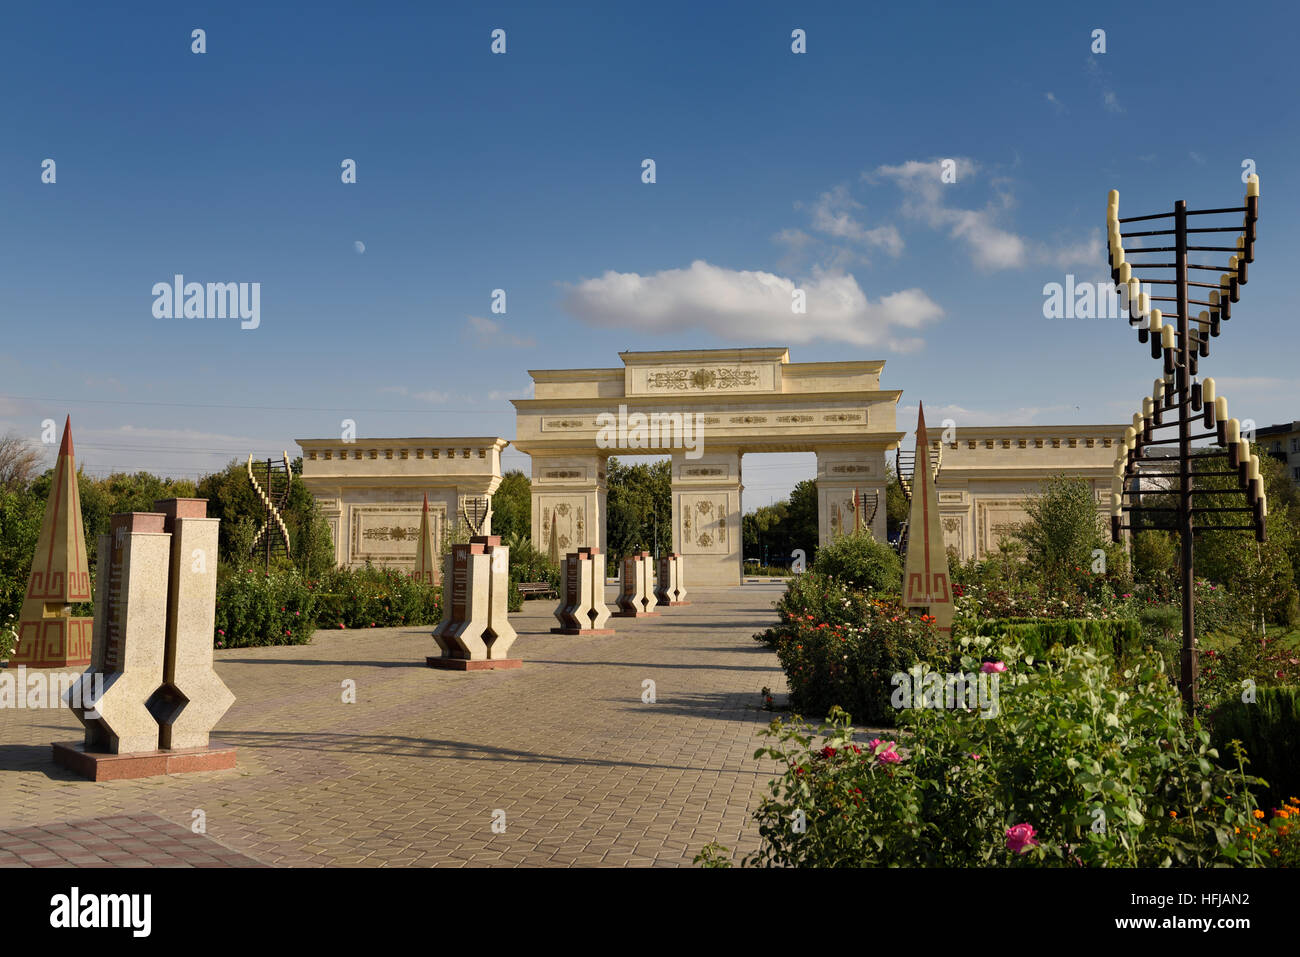 Gates to Independence Park Shymkent Kazakhstan with moon and rose flower gardens Stock Photo